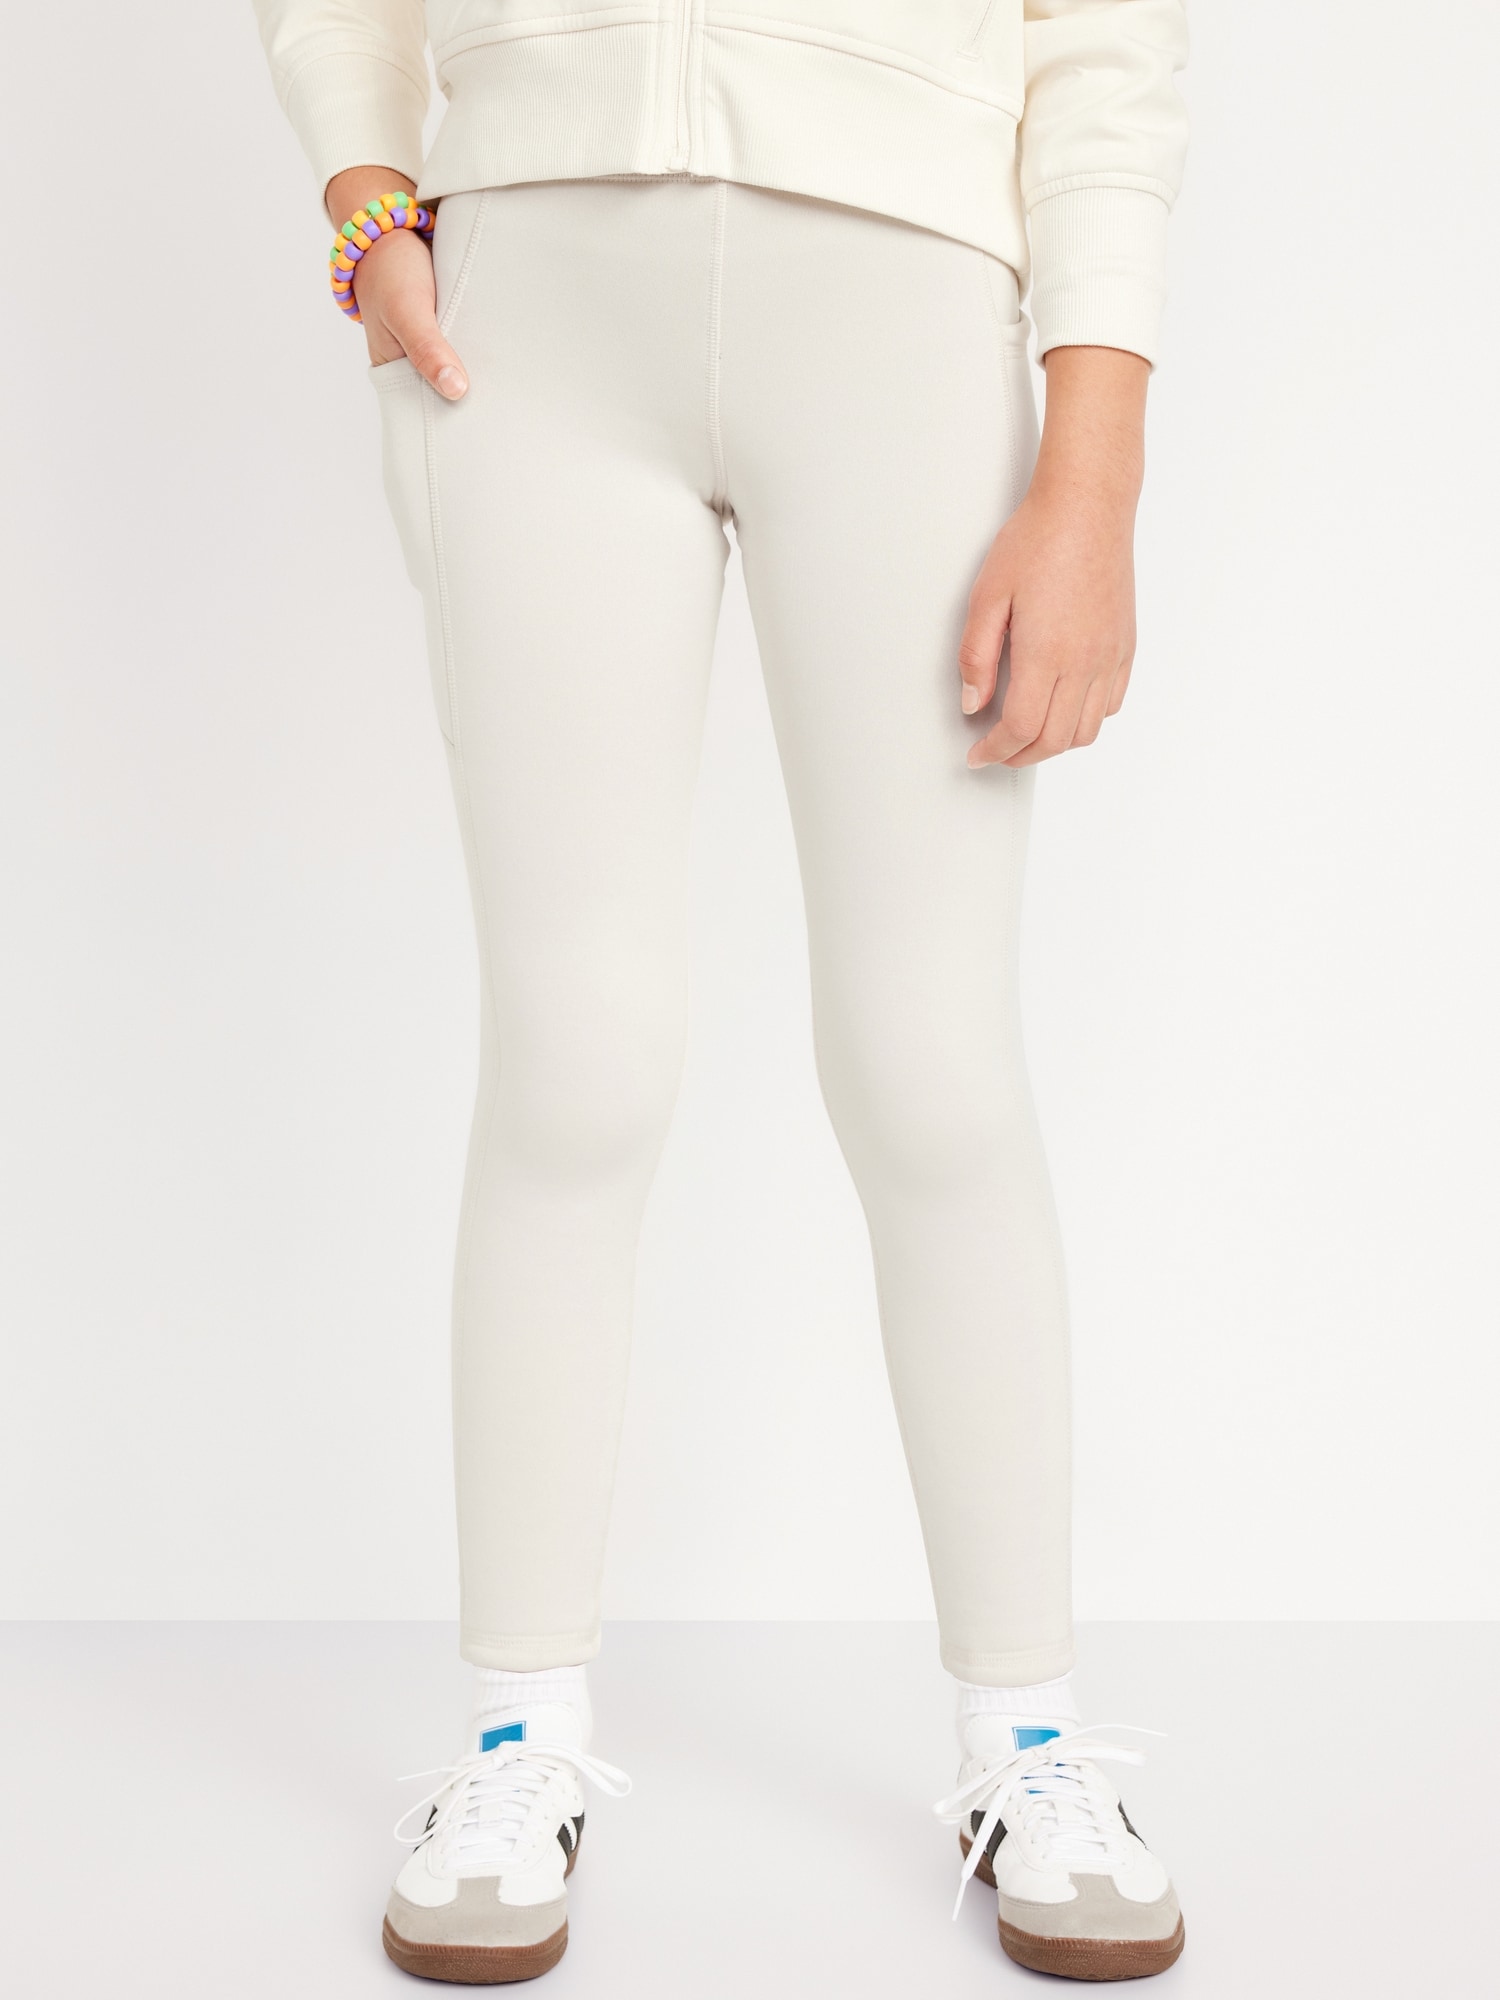 Slim Fit Pants for Girls